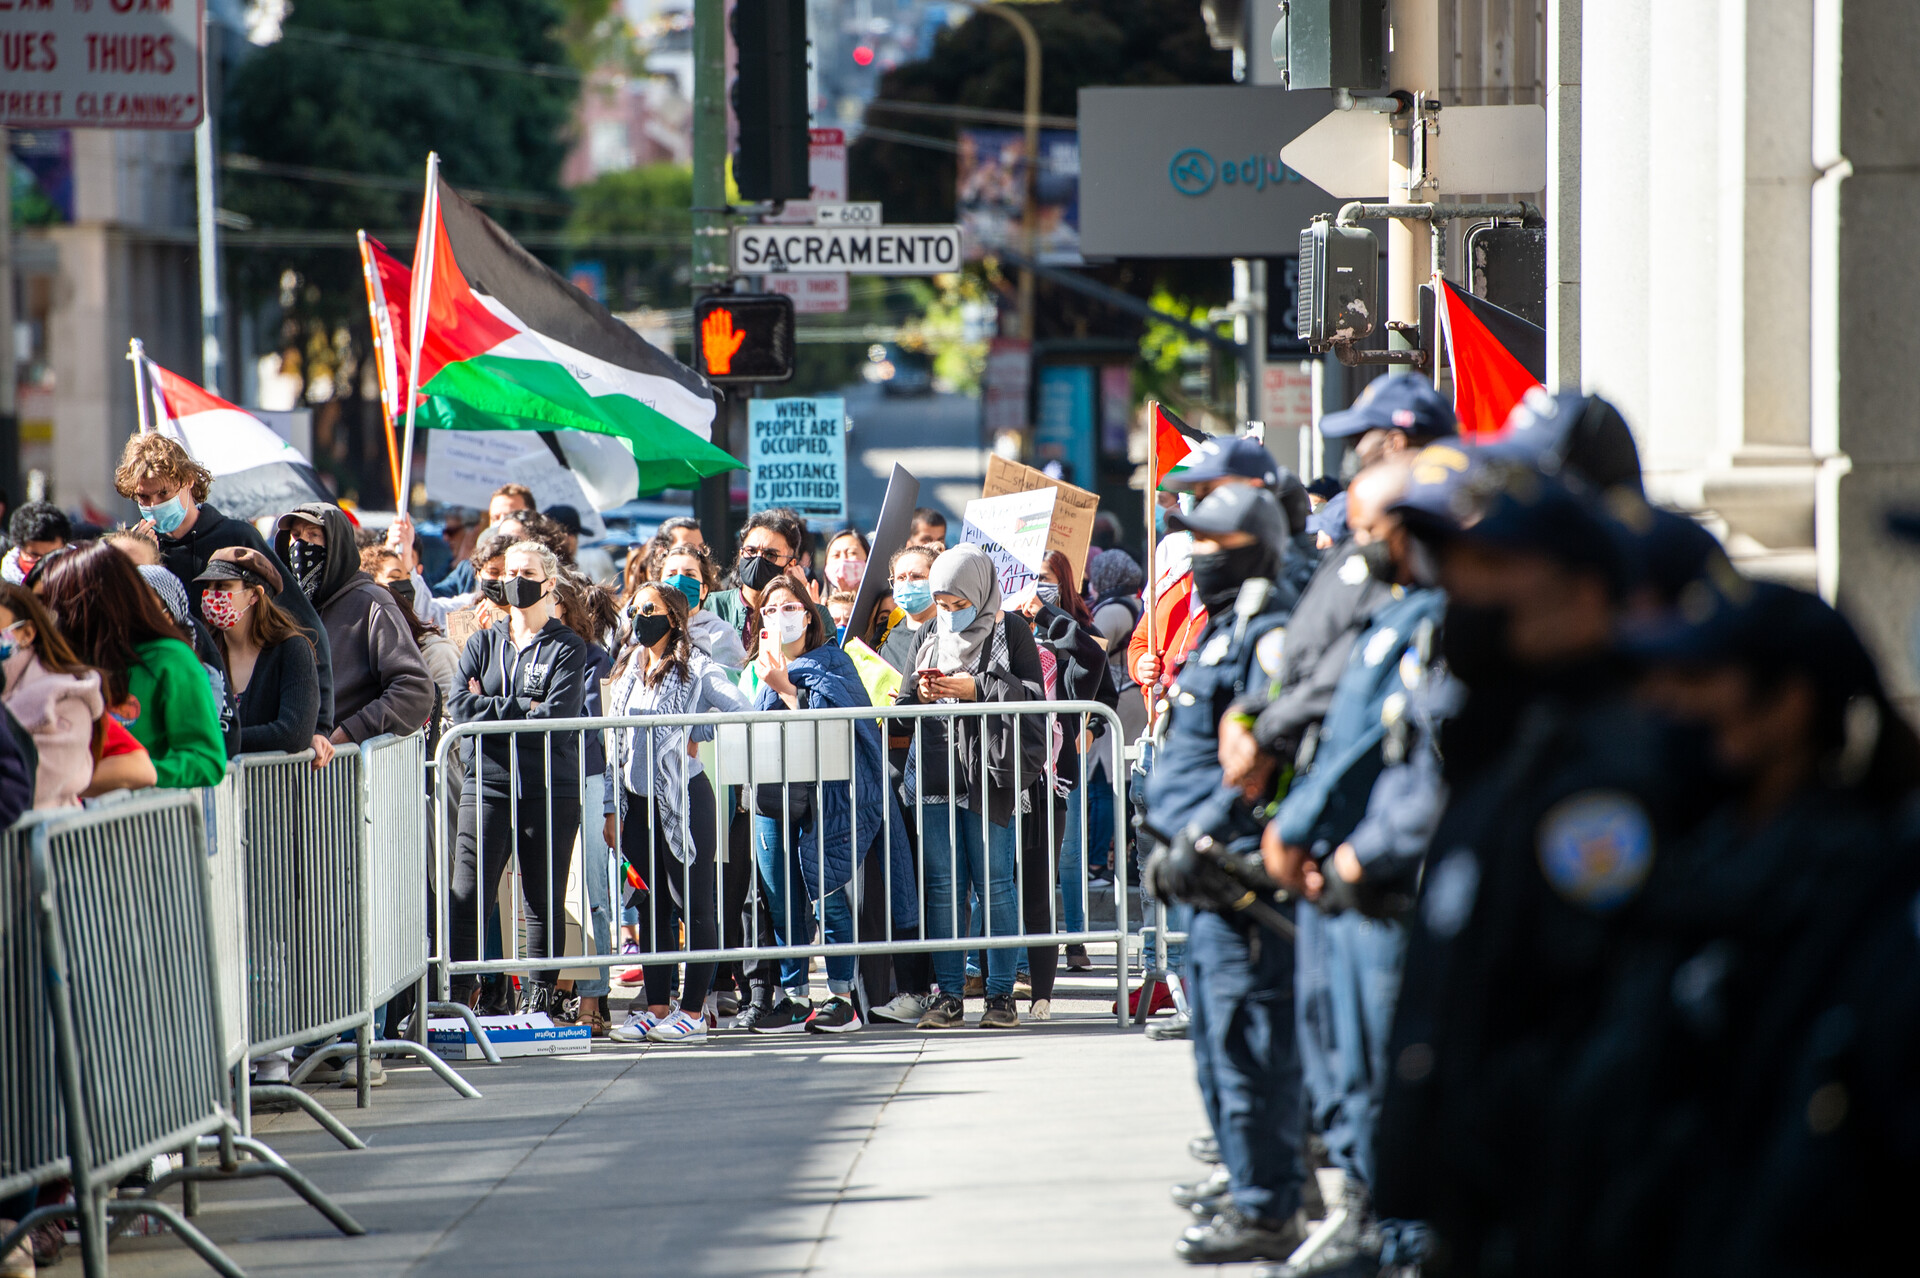 A line of police stand in front of the Israeli Consulate during a rally in solidarity with Palestine in San Francisco on May 18, 2021.